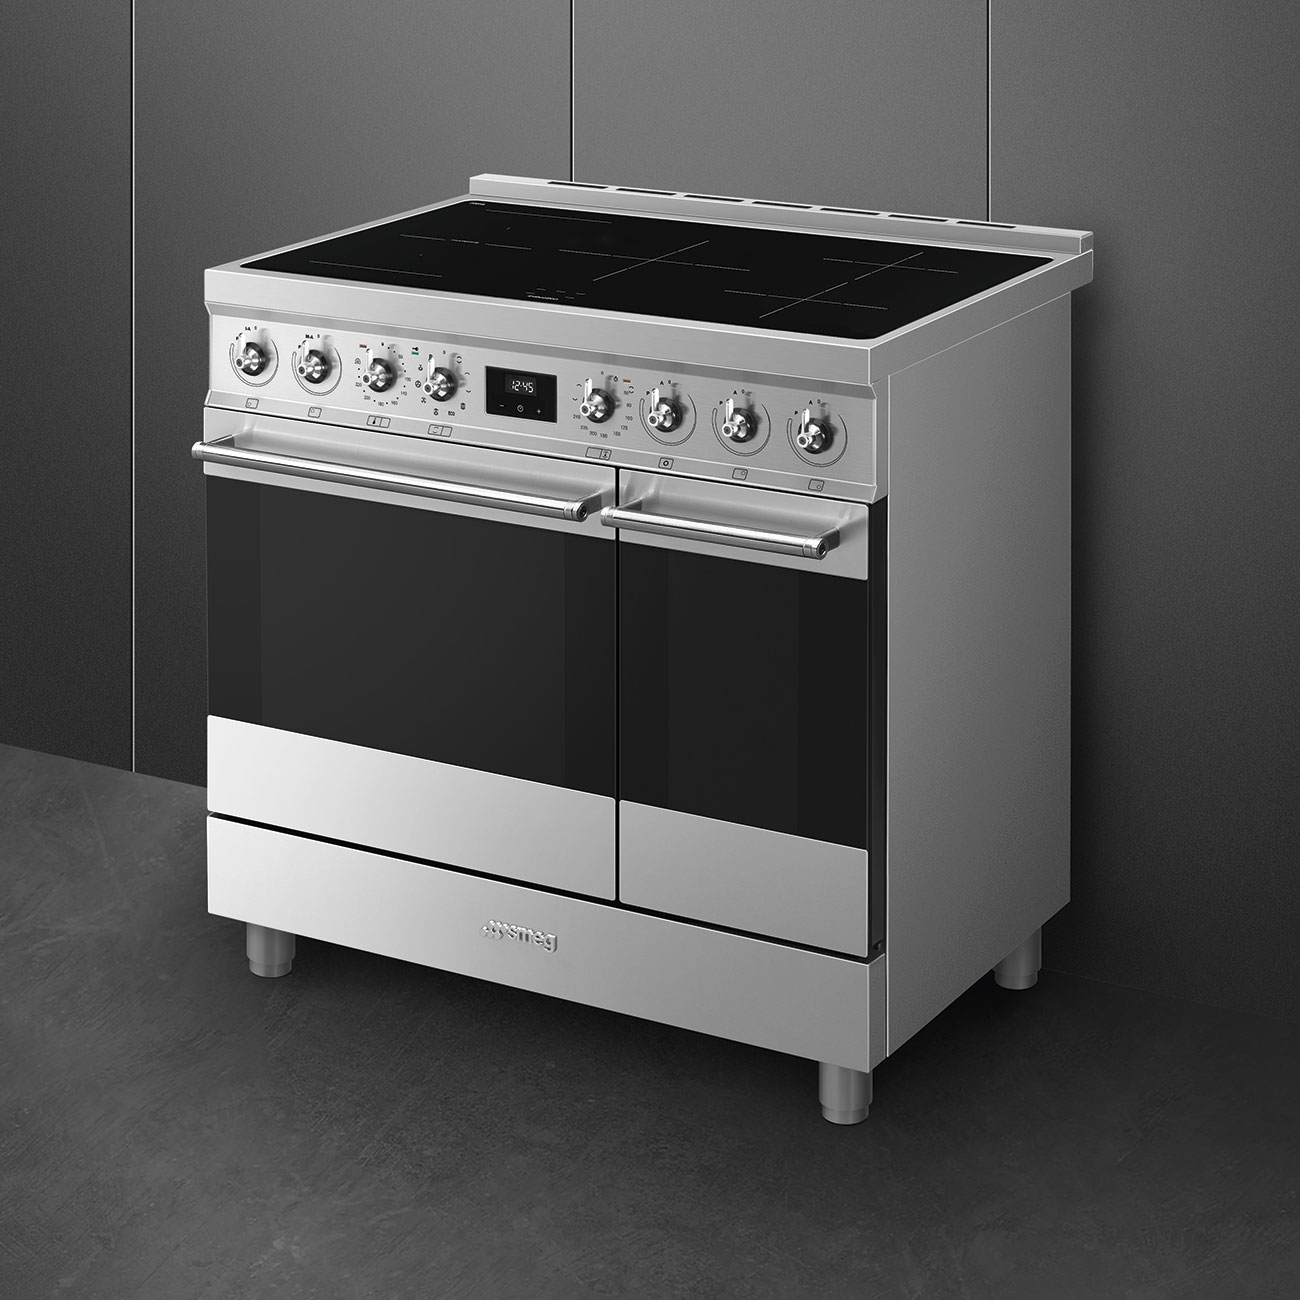 Smeg Stainless steel Cooker with Induction Hob_4